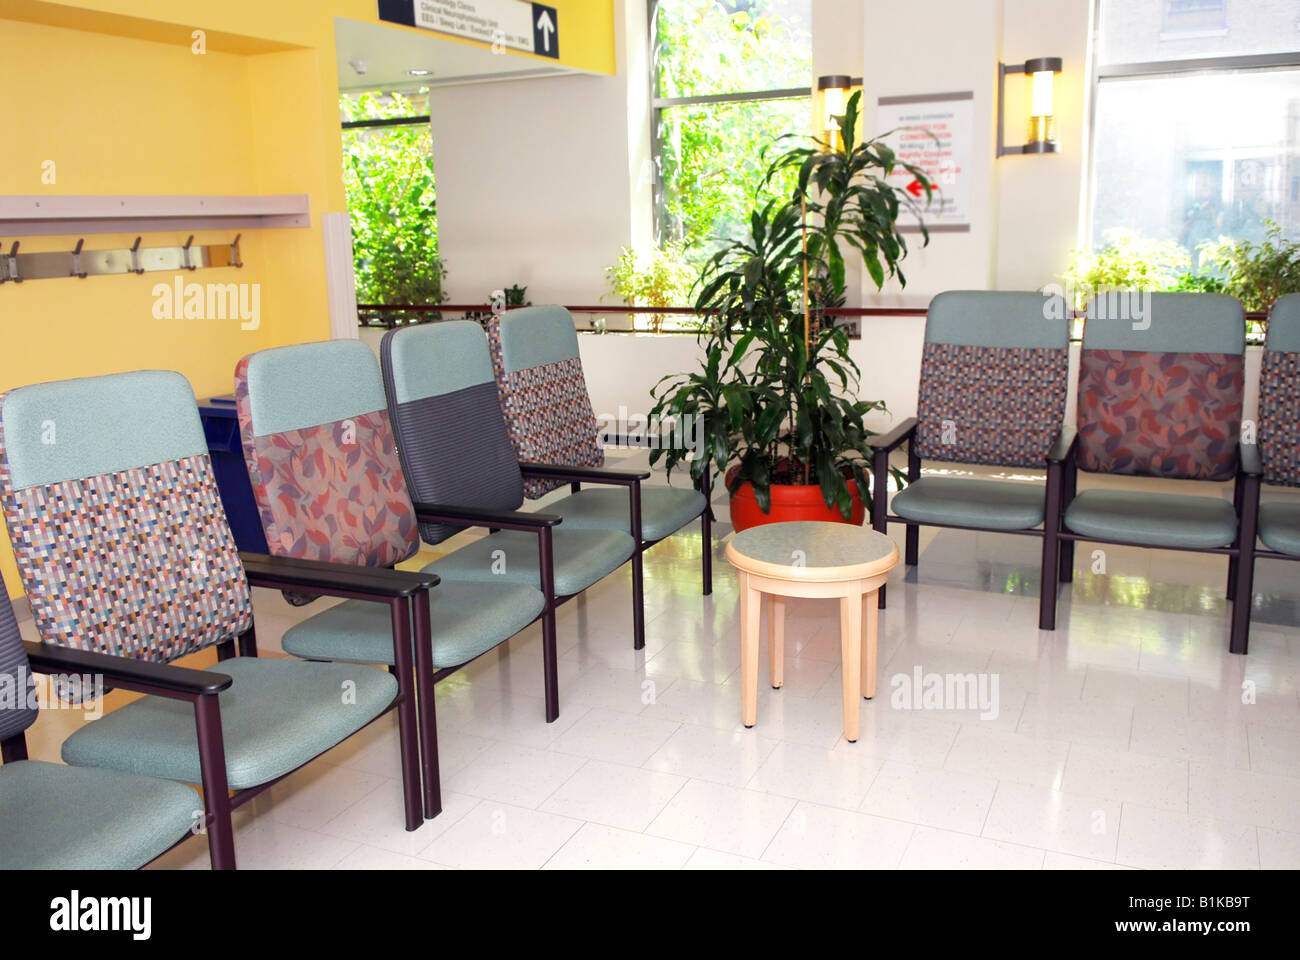 Hospital Or Clinic Waiting Room With Empty Chairs Stock Photo